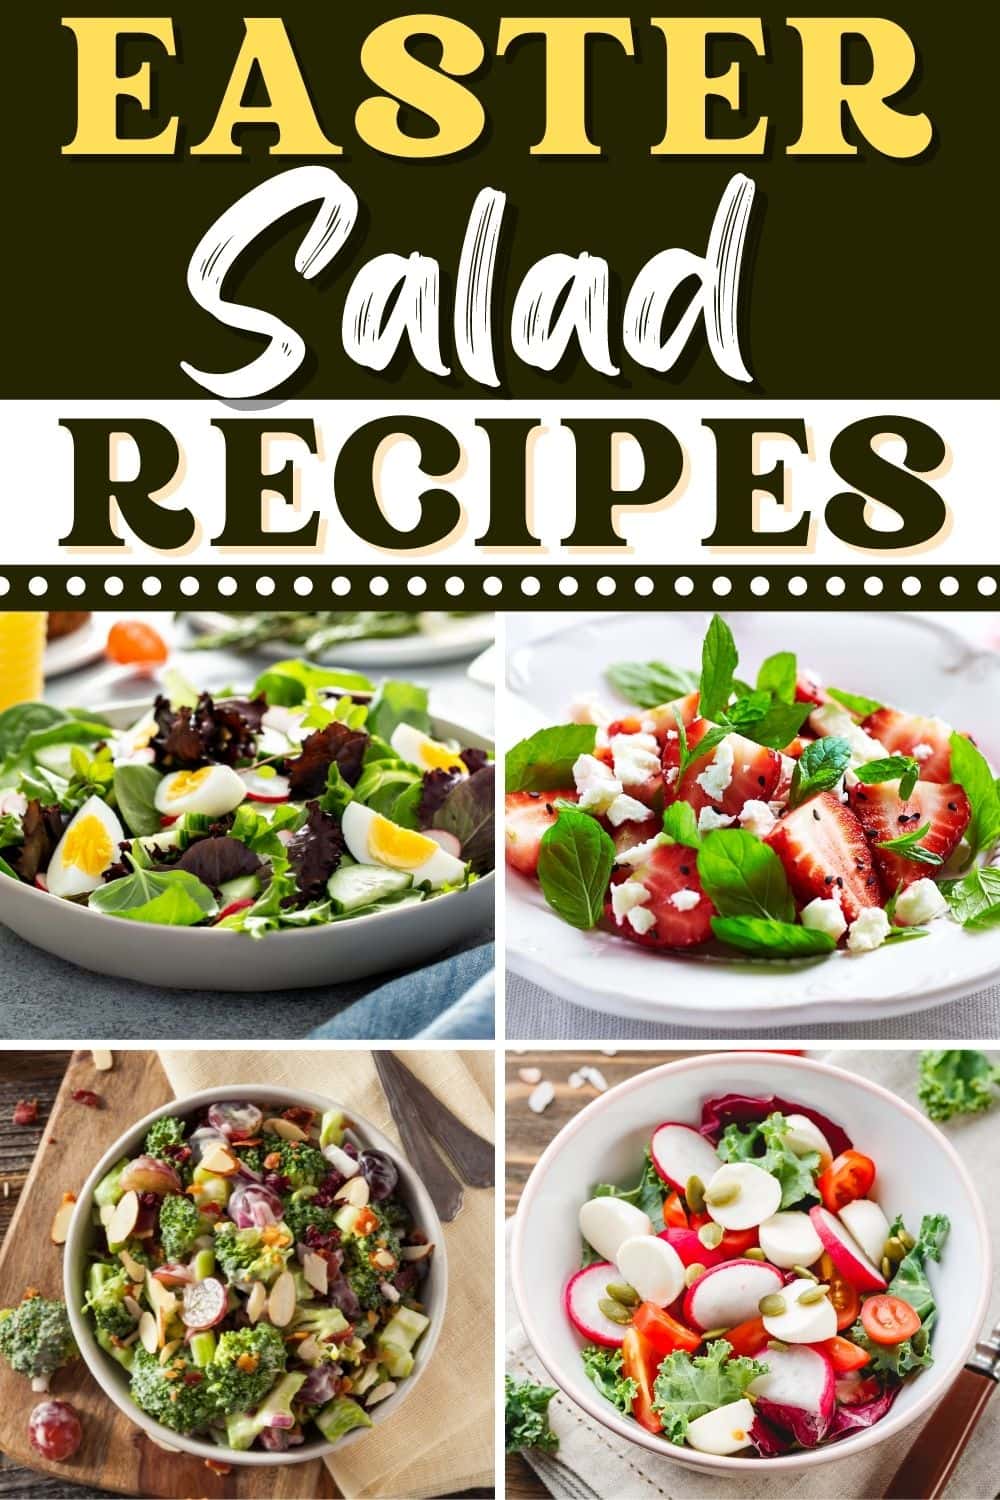 25 Easy Easter Salad Recipes - Insanely Good